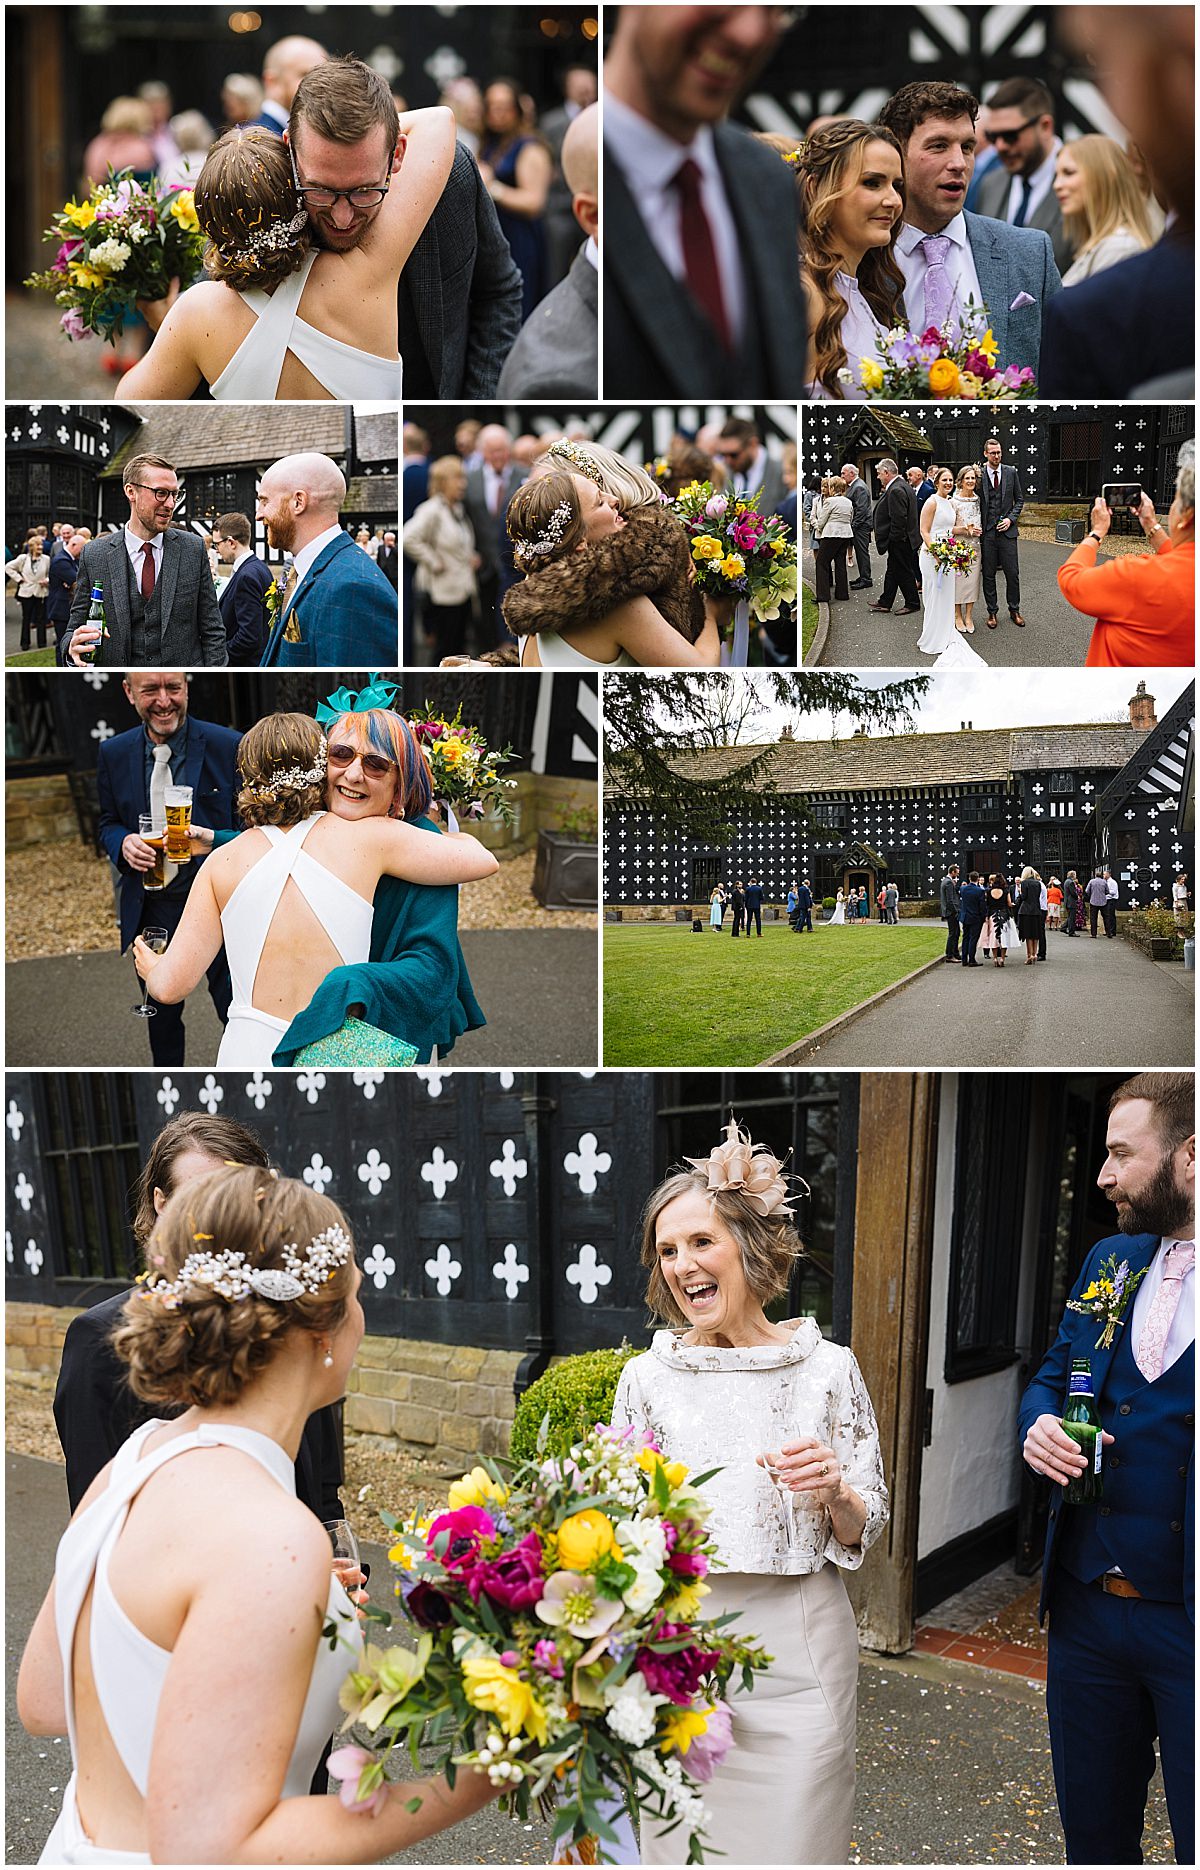 A collage of nine photos depicting various scenes from a wedding. Top row shows a couple embracing, a bride conversing with guests, and a group of attendees. Middle row features guests interacting and the bride and groom walking with a historic black and white building in the background. Bottom row shows the bride hugging a guest, guests mingling outside the venue, and a laughing woman in conversation. The overall mood is festive and joyful.